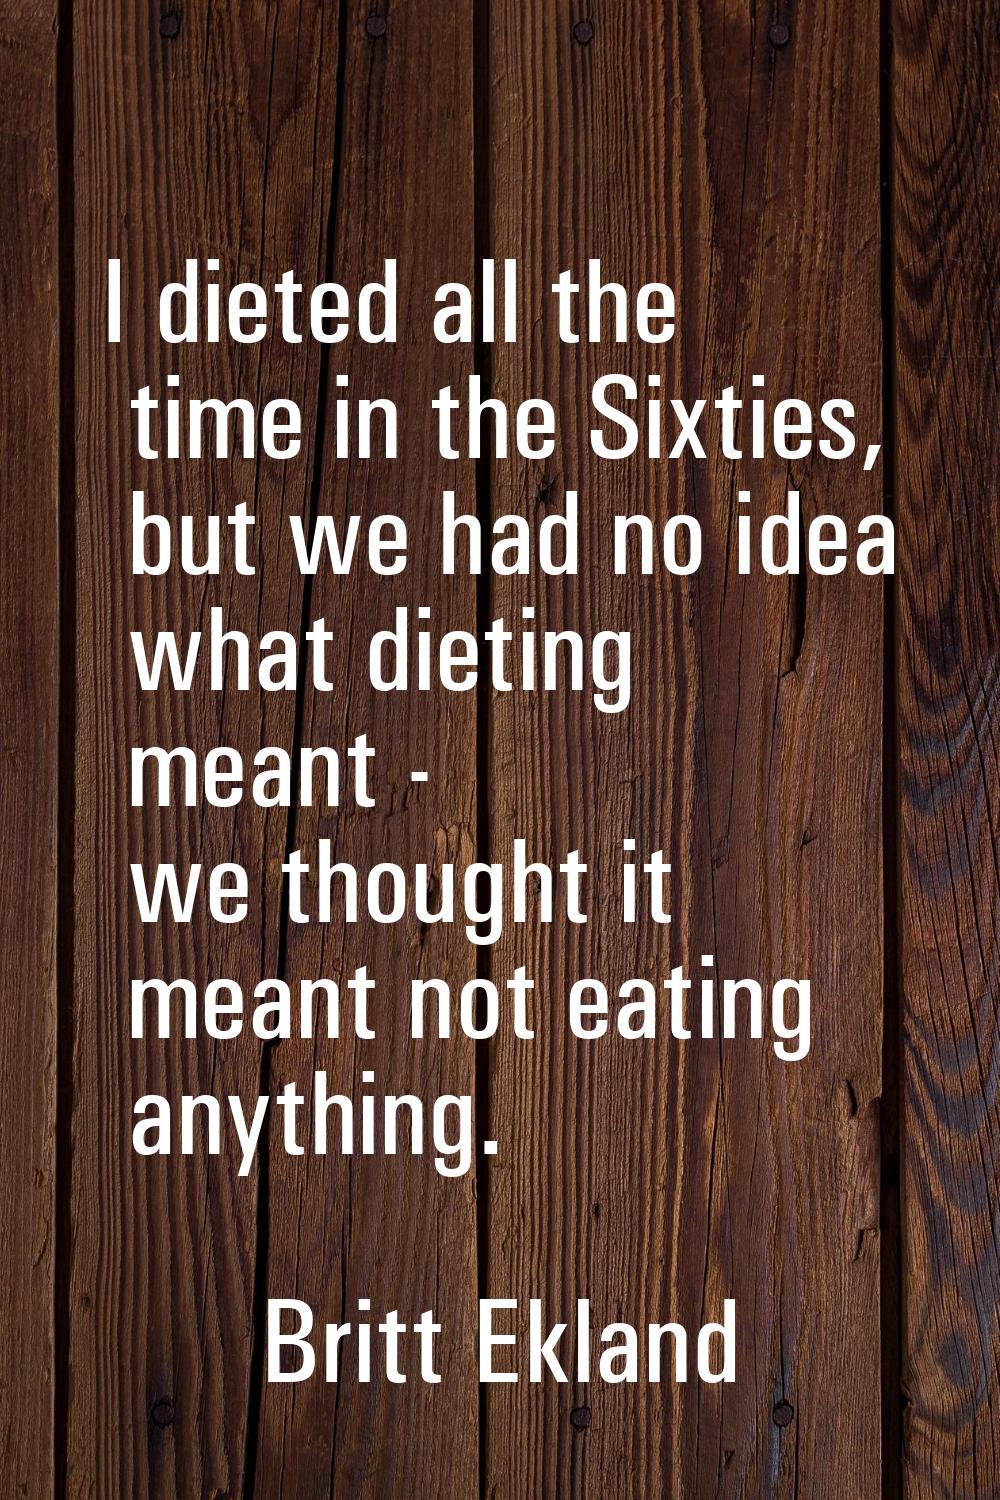 I dieted all the time in the Sixties, but we had no idea what dieting meant - we thought it meant n